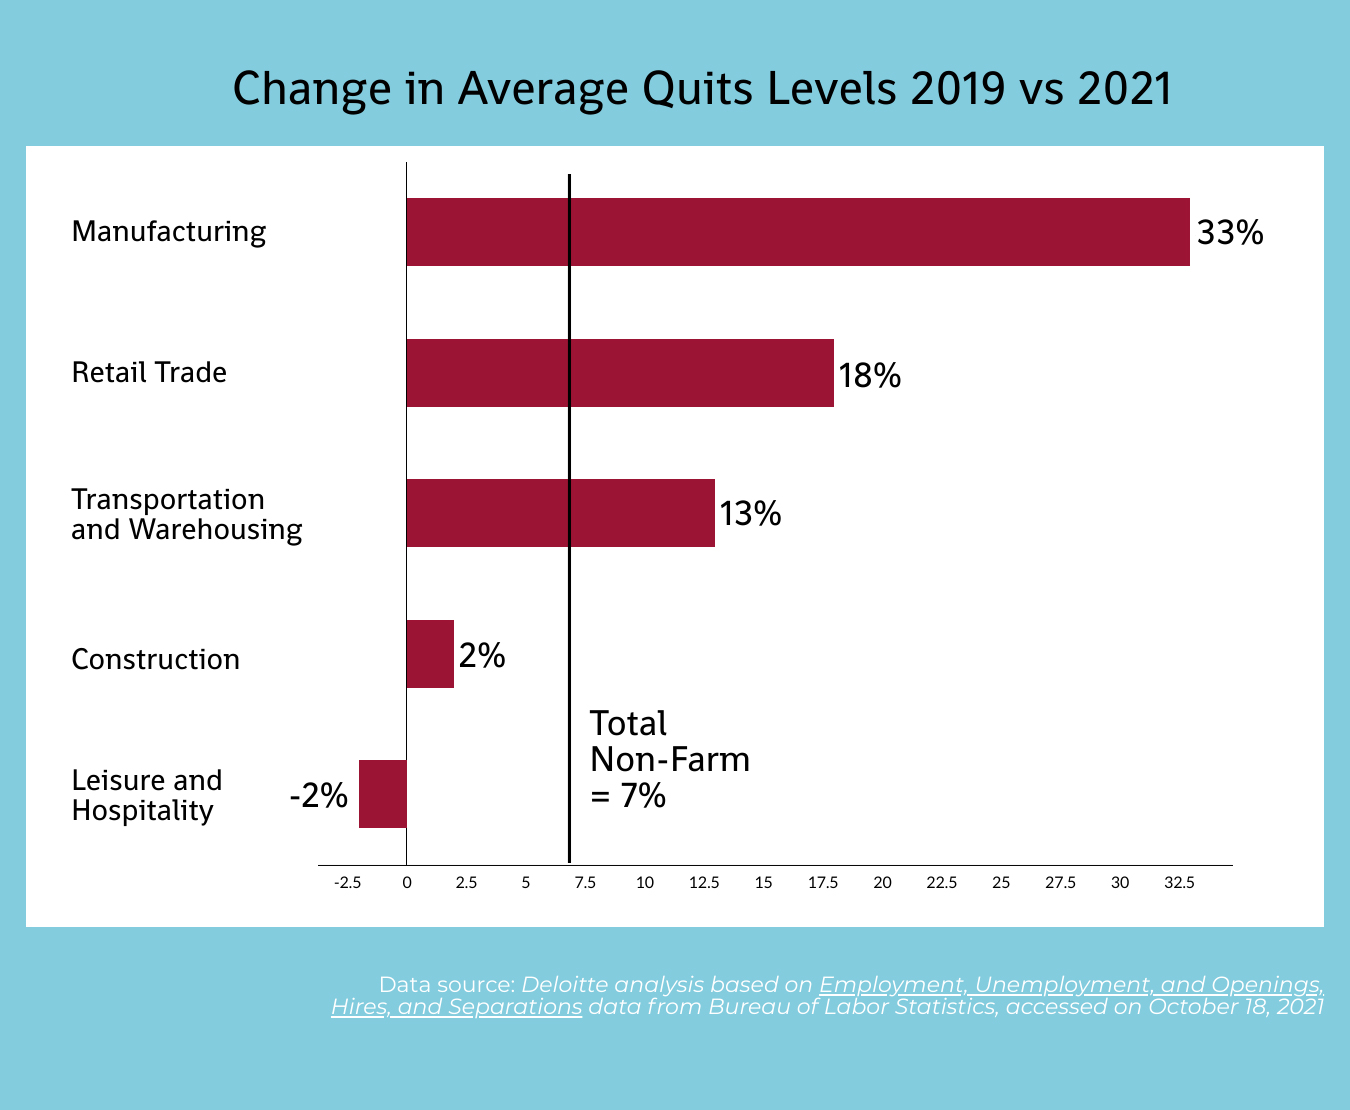 manufacturing workforce retention strategies are needed to respond to the relatively weak performance of manufacturing in change in quits levels at the end of 2021. Manufacturing quits increased 33% while retail trade quits increased 18% and transportation and warehousing increased 13%. Construction increased 2% and leisure and hospitality saw a decrease in quits by -2%. The average non-farm quits levels changes was 7%